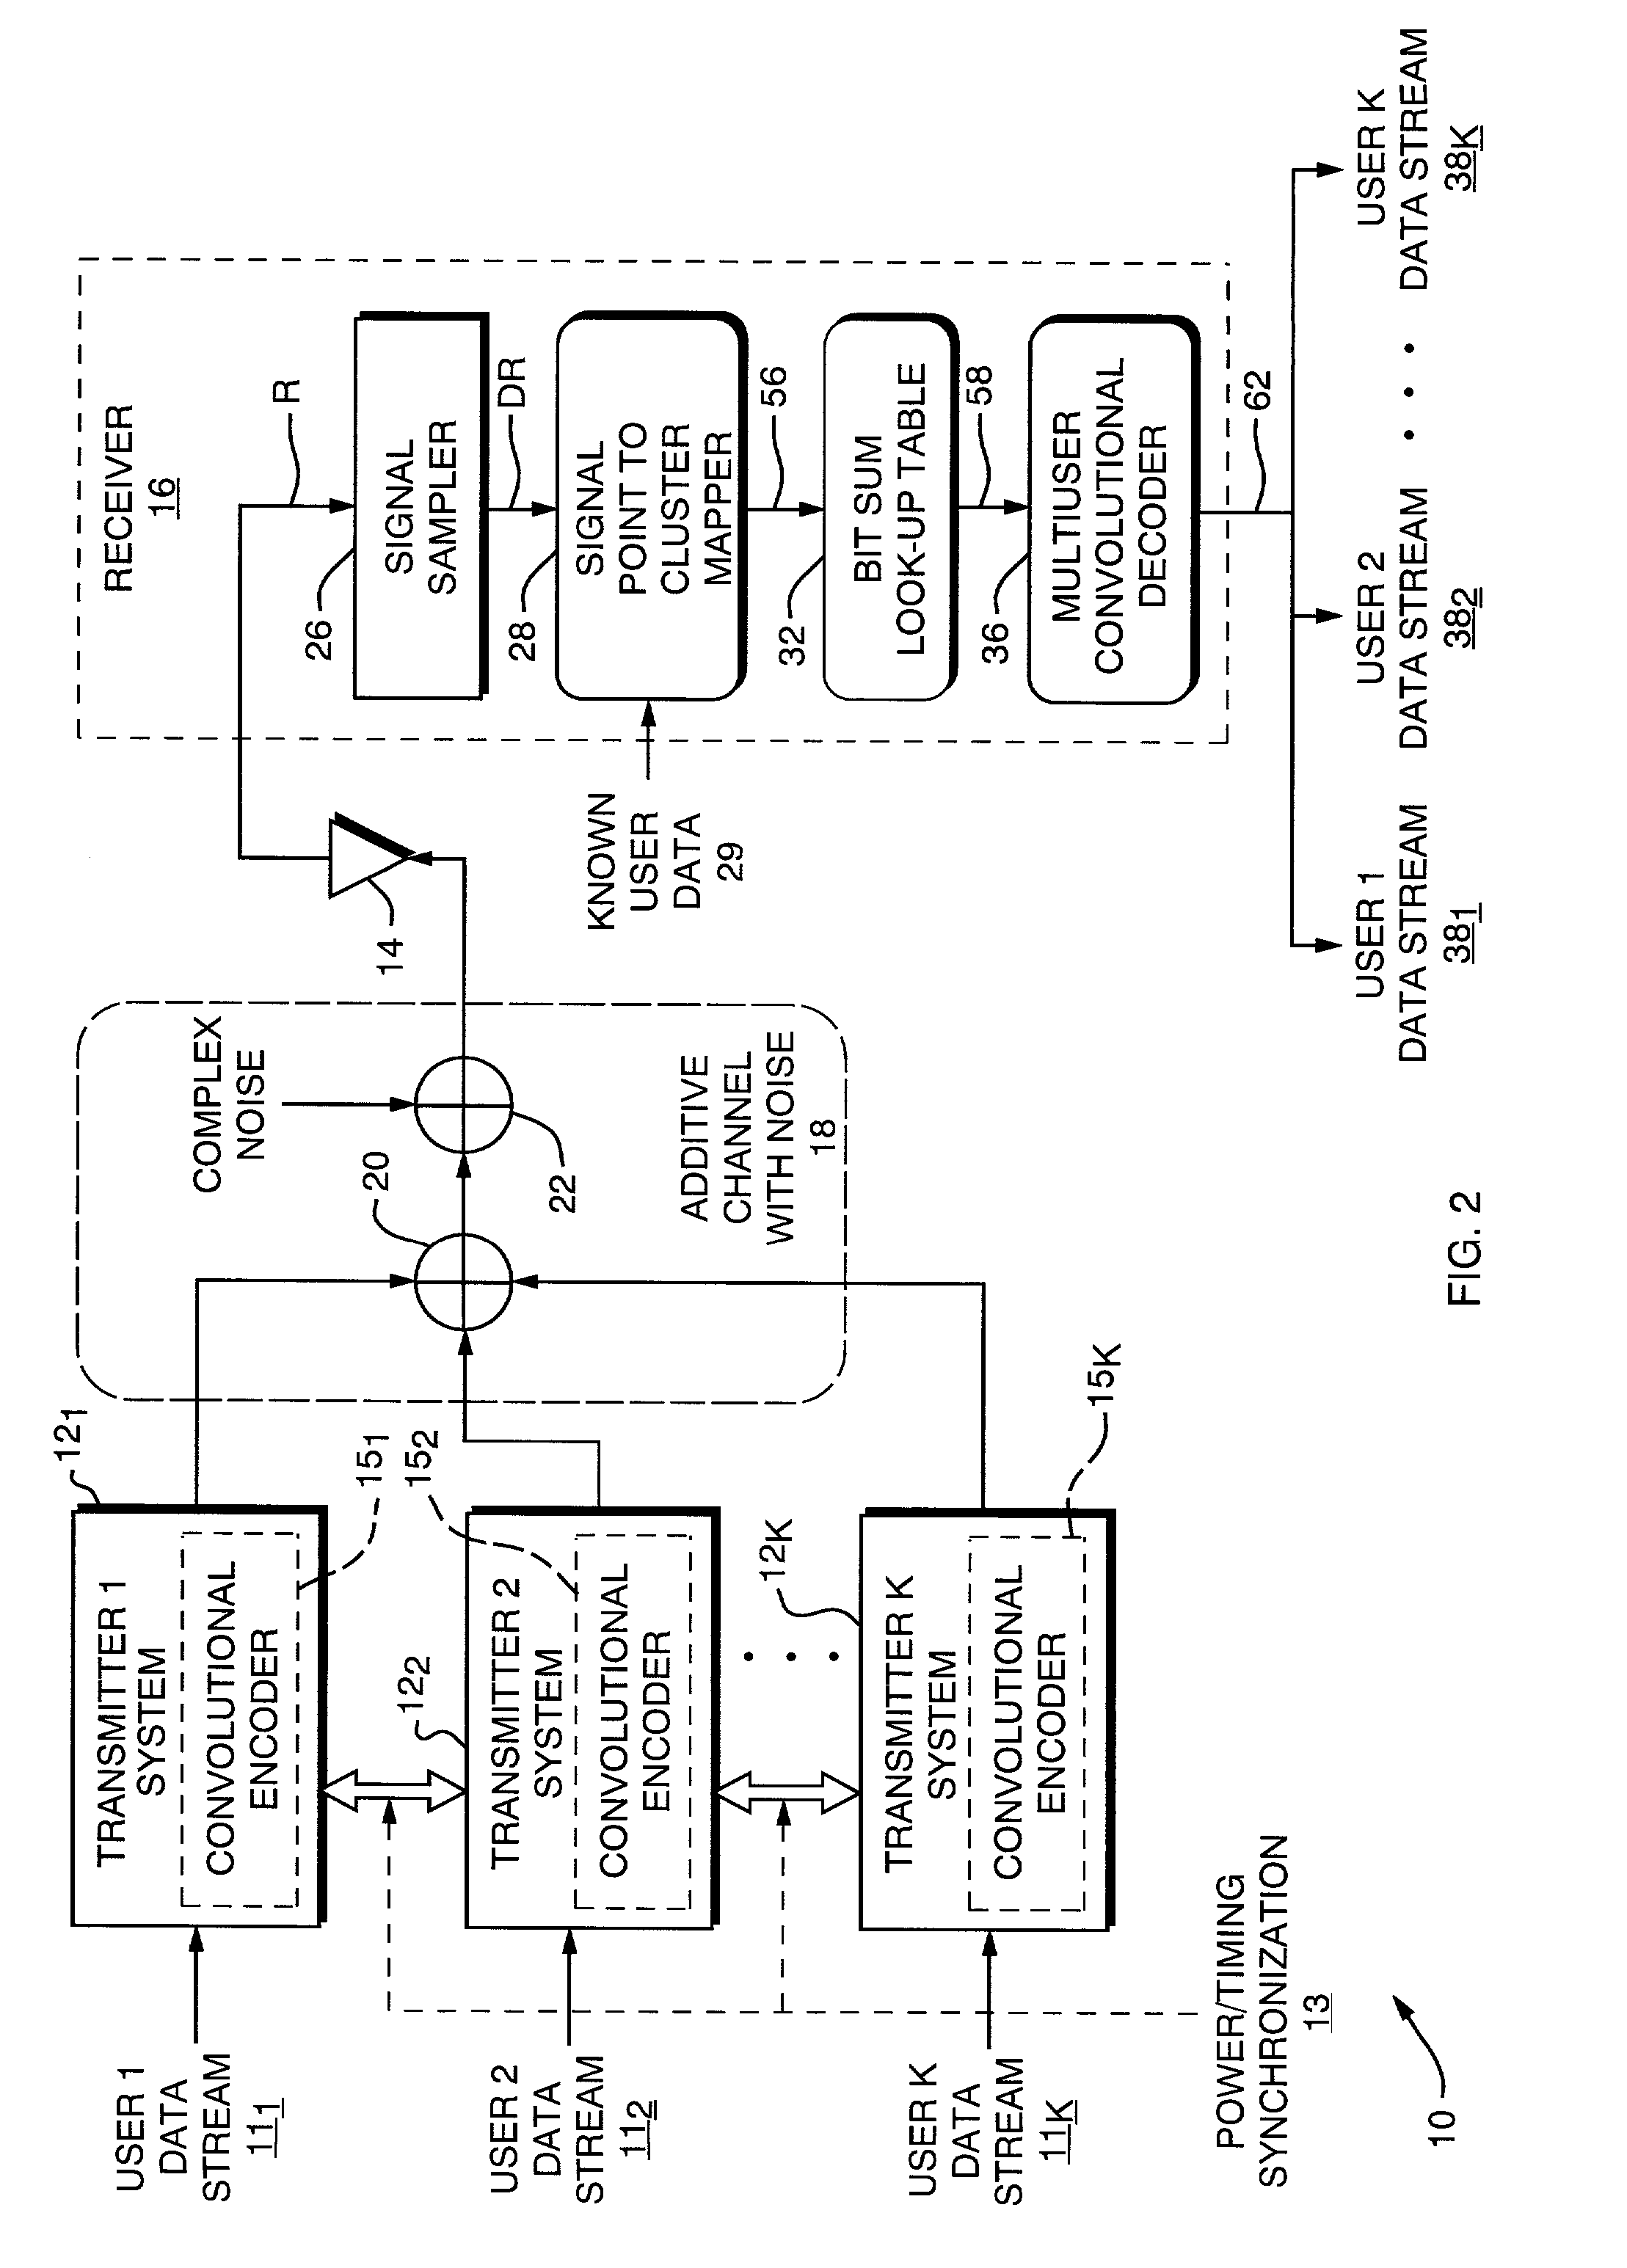 Cooperative code-enhanced multi-user communications system